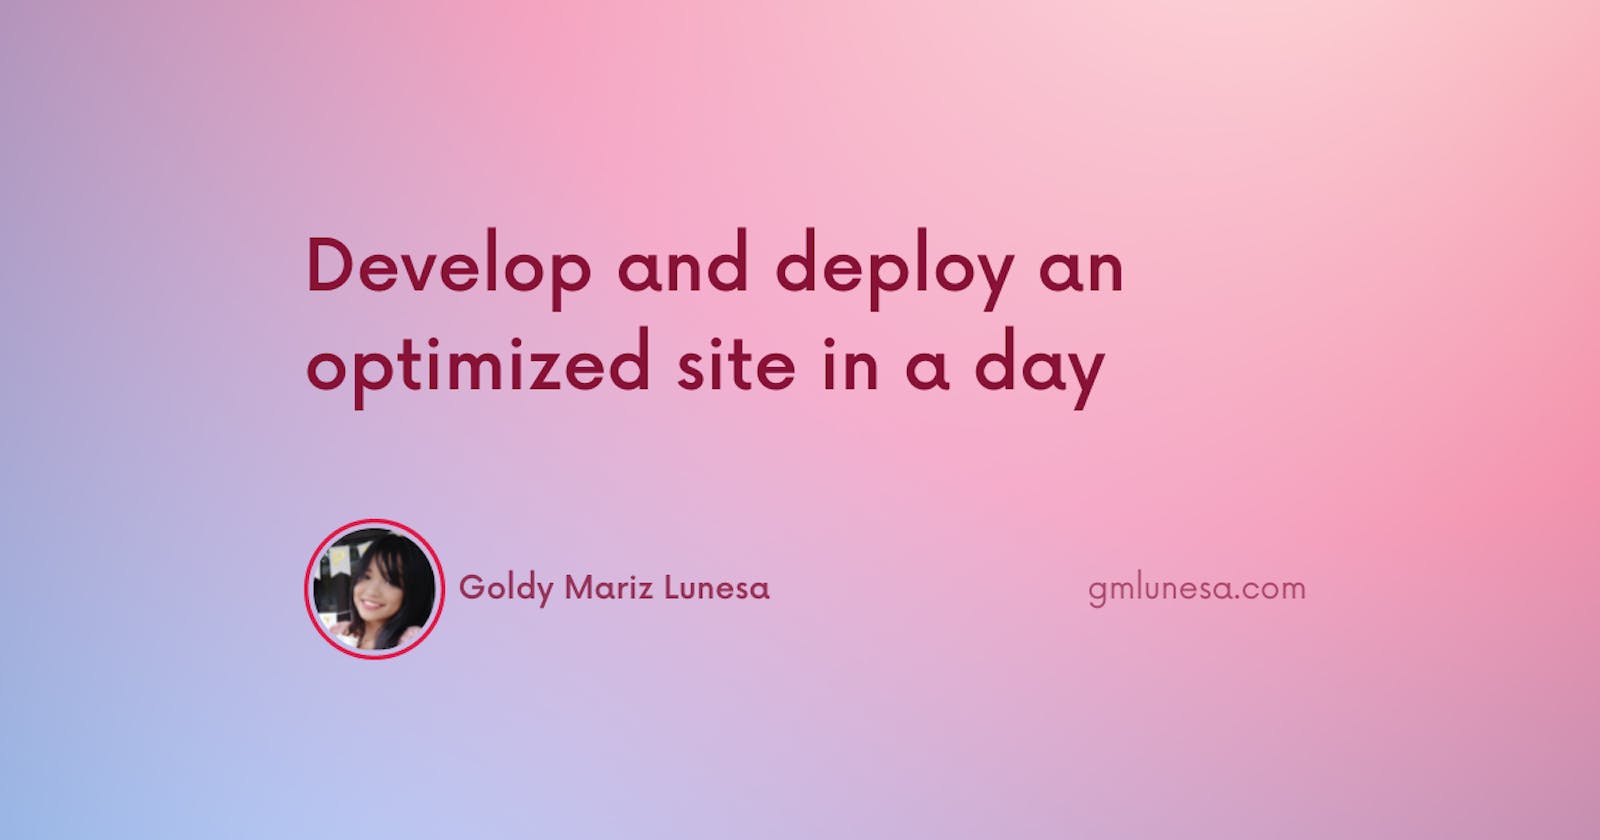 Develop and deploy an optimized site in a day